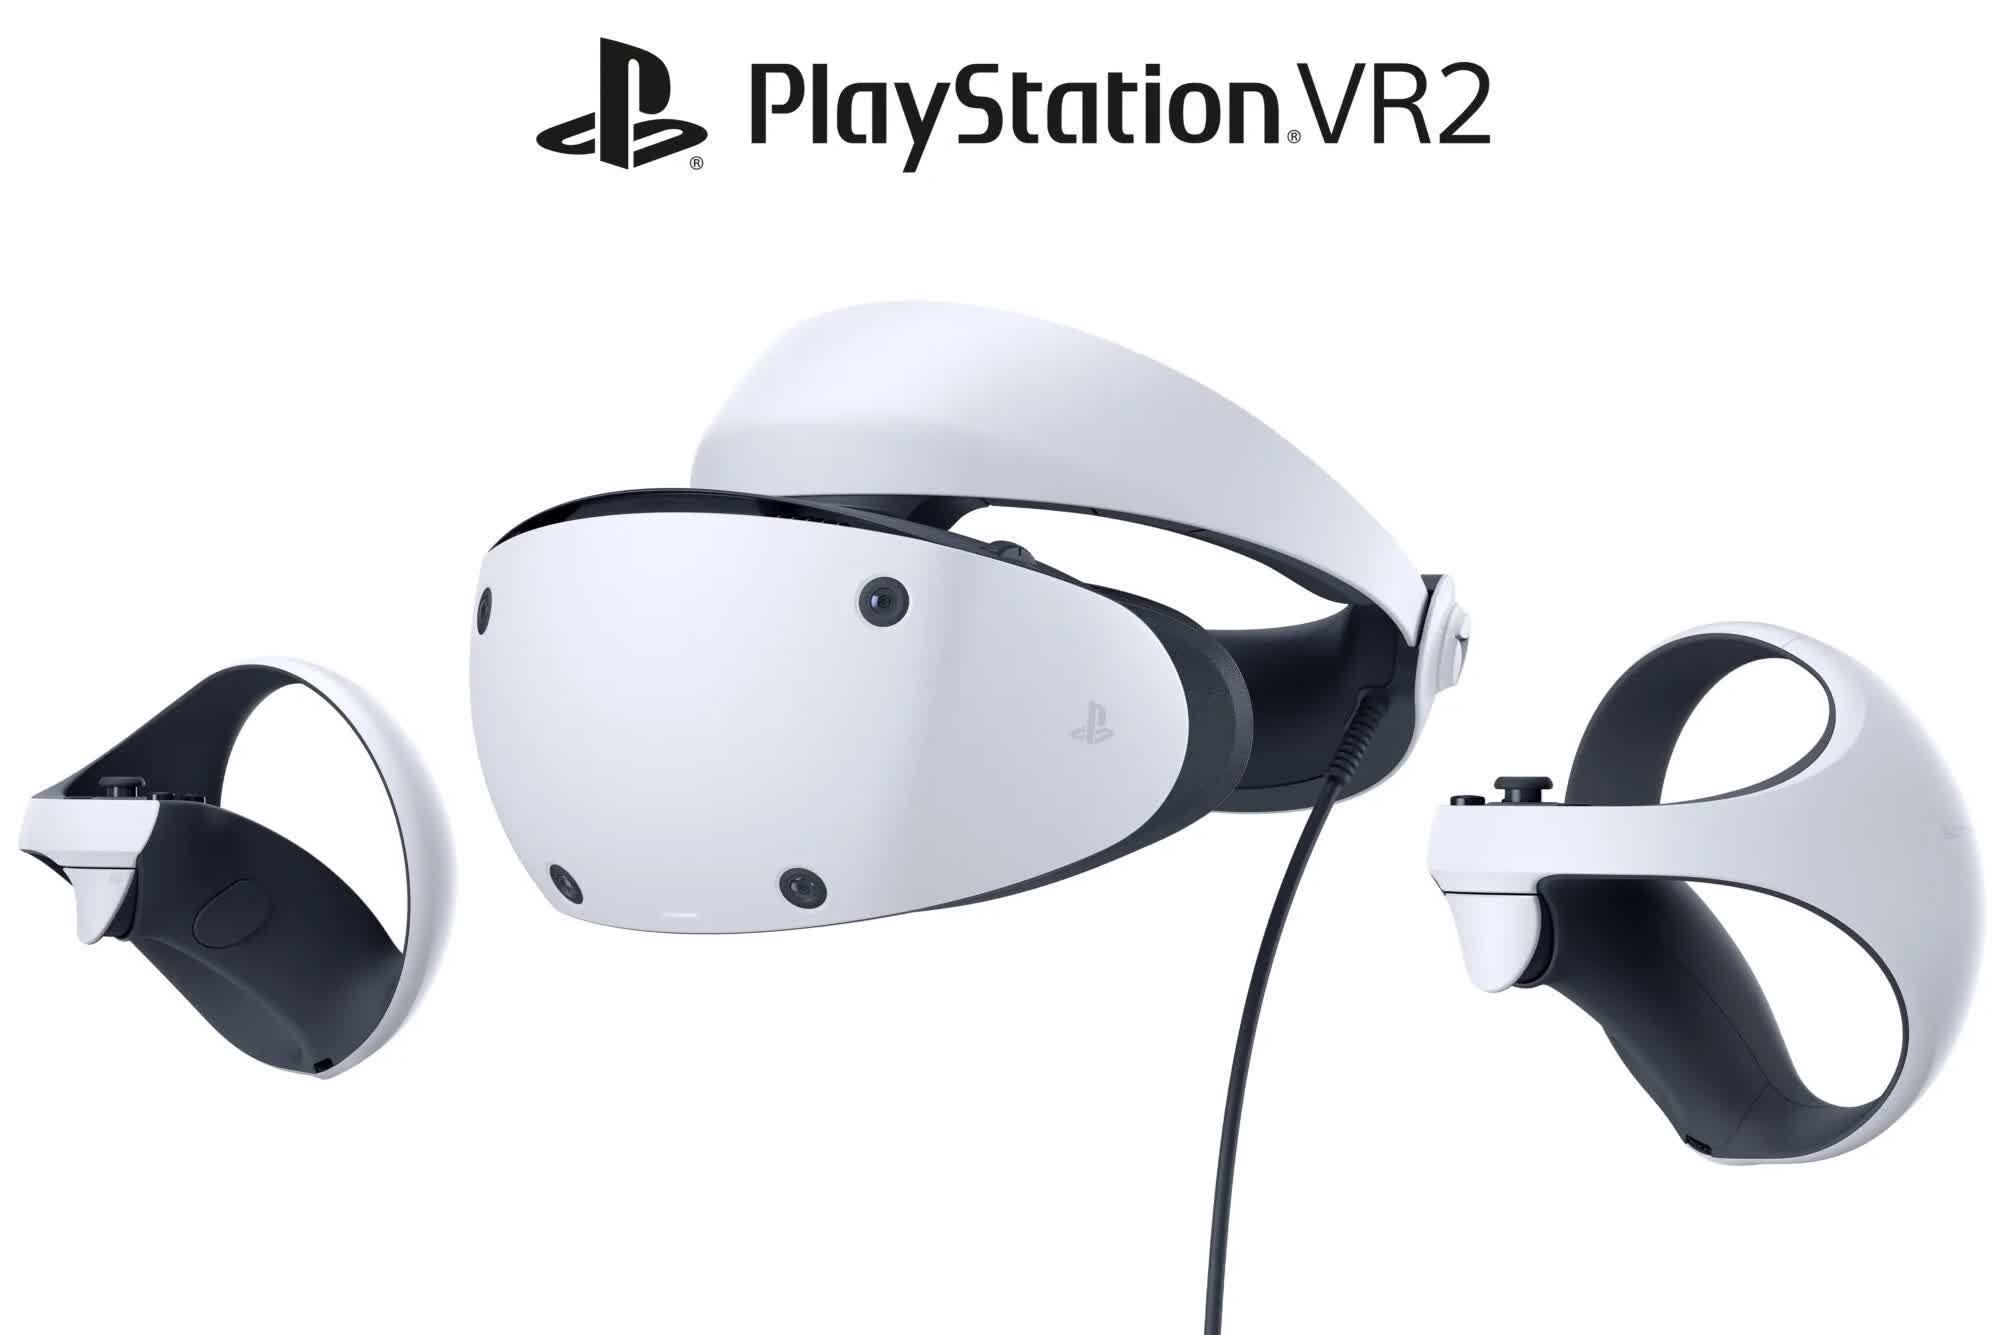 Sony confirms early 2023 launch for PlayStation VR2